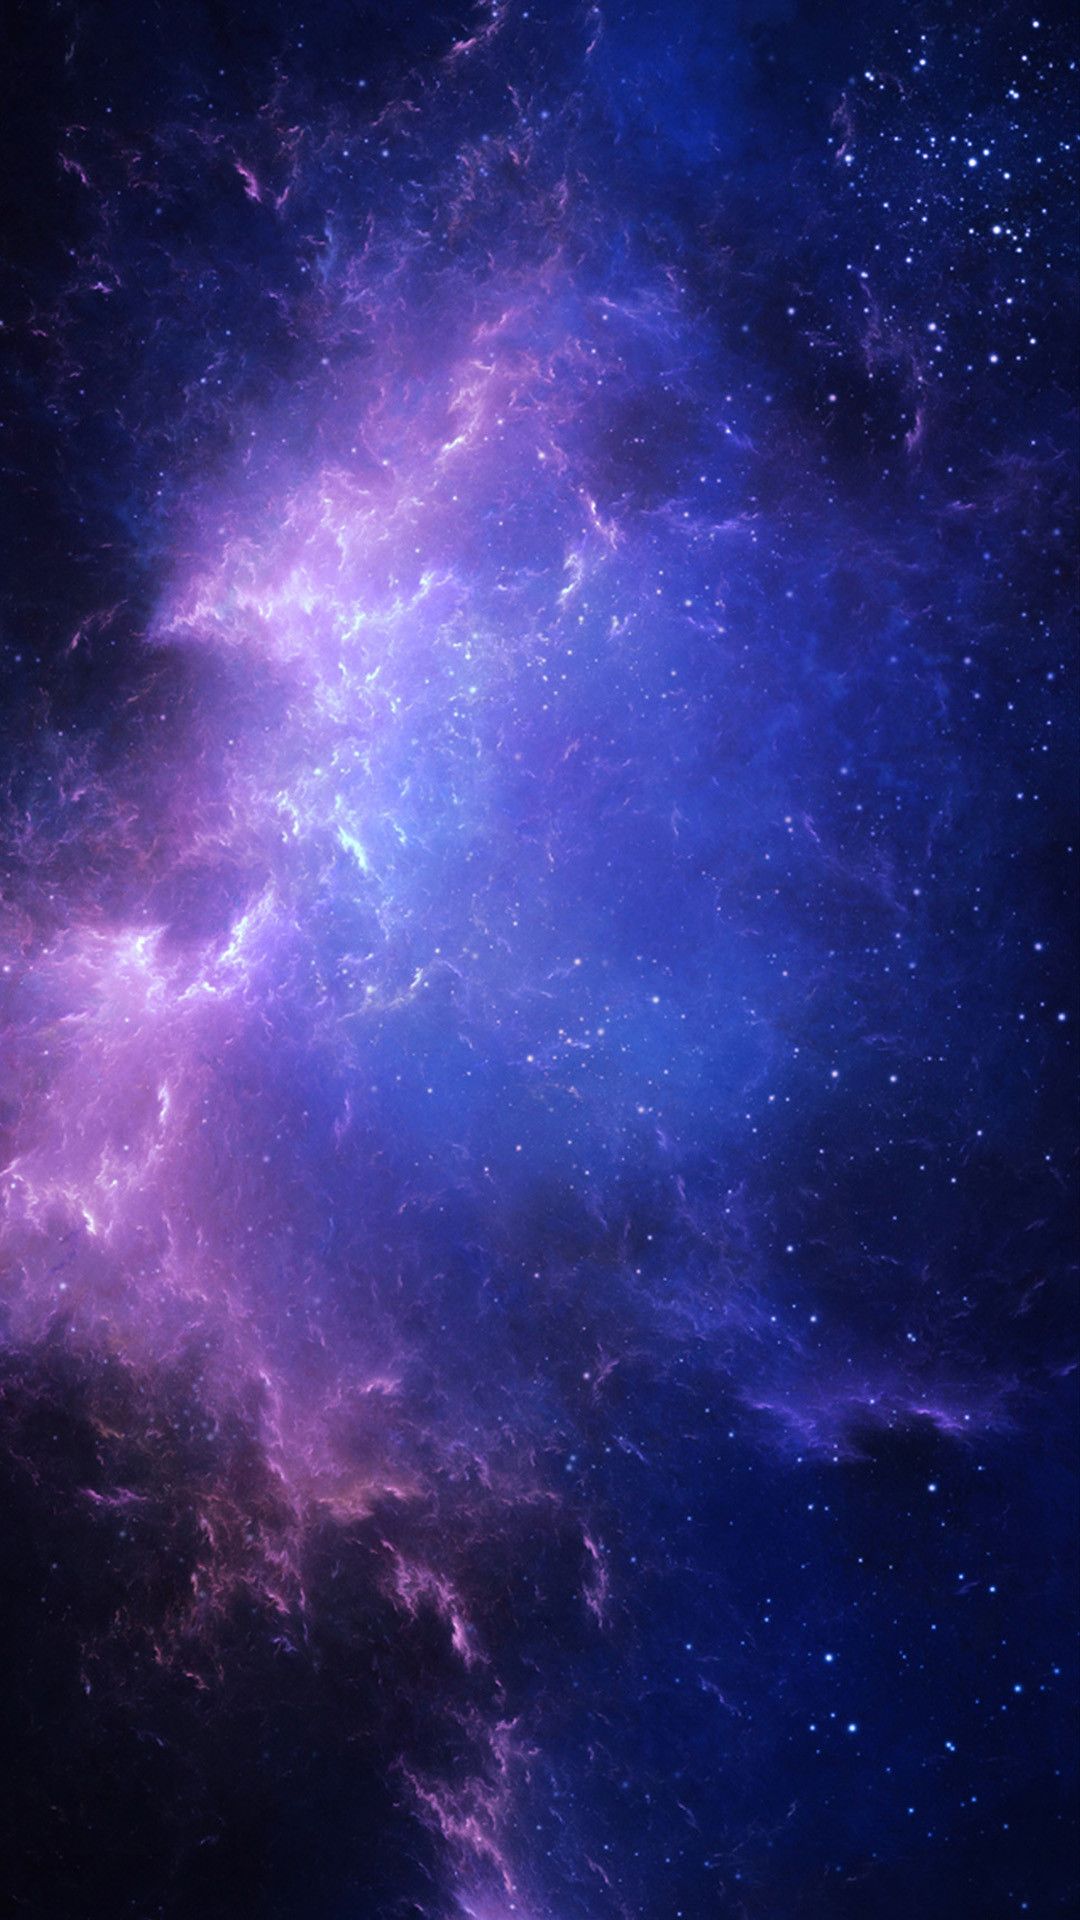 New HD Space Wallpaper iPhone On Home Screen In Kecbio